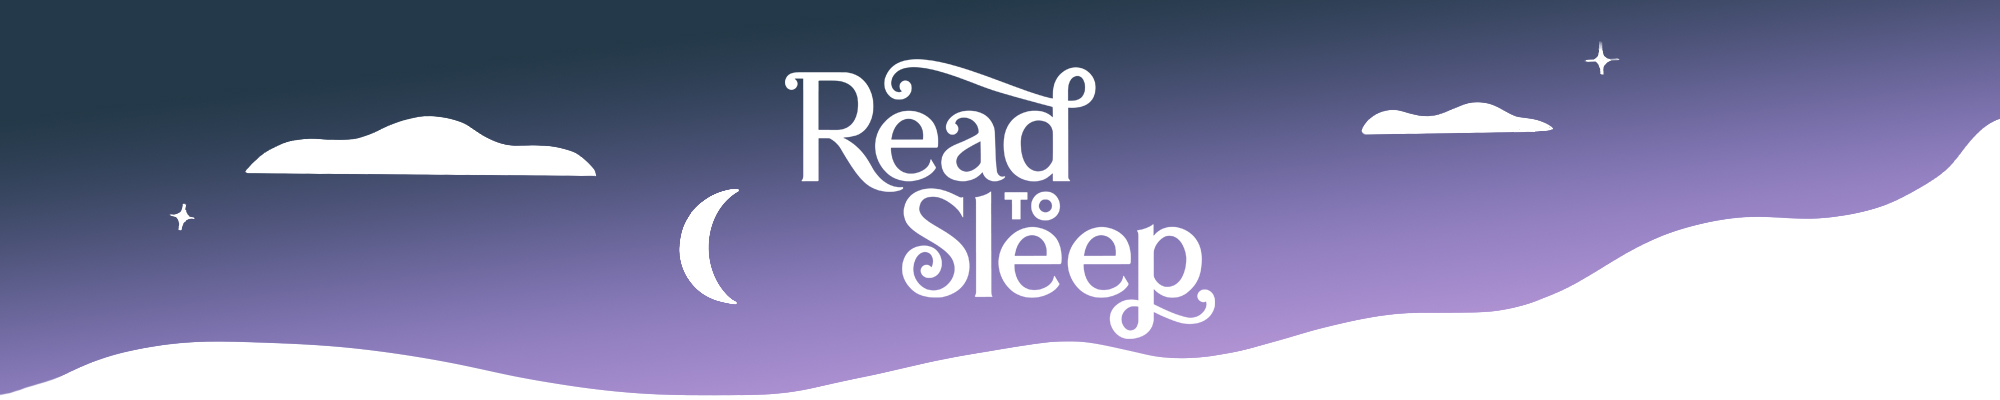 Read your way to better sleep